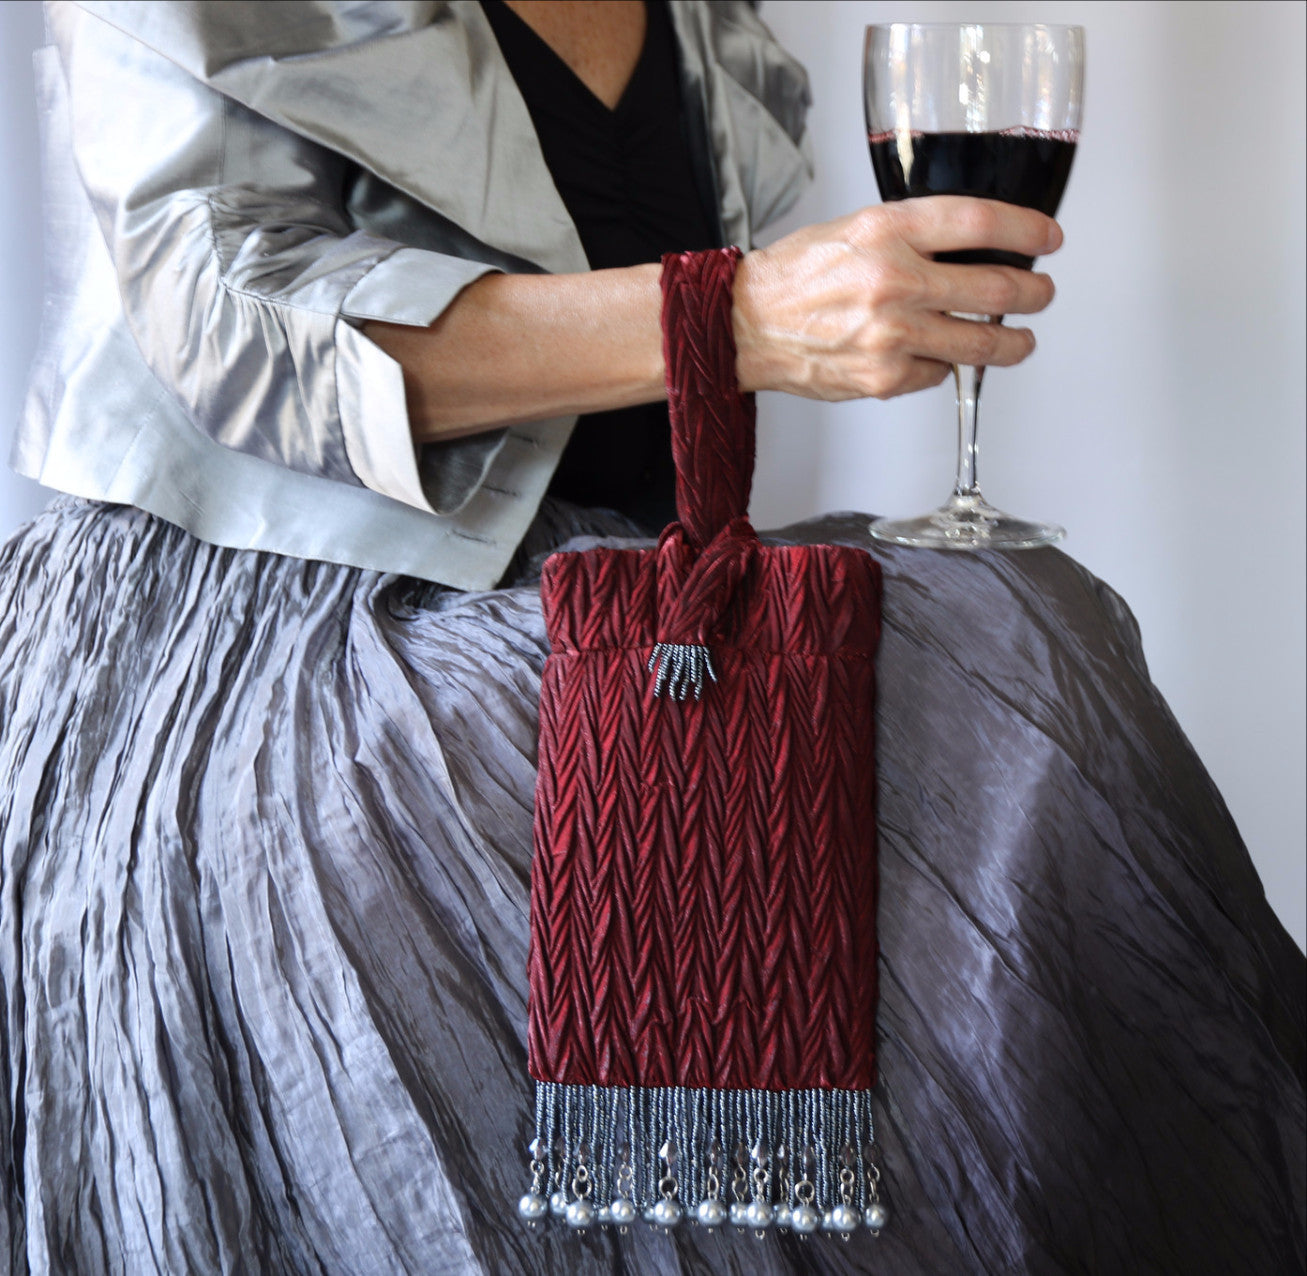 Burgundy Evening Bag from Jenny Jag-Wear Design. Image of  a woman demonstrating how the bag slips onto ladies' wrist, keeping hands free to hold a glass of wine. The Zara Collection by Jenny Jag-Wear Design 